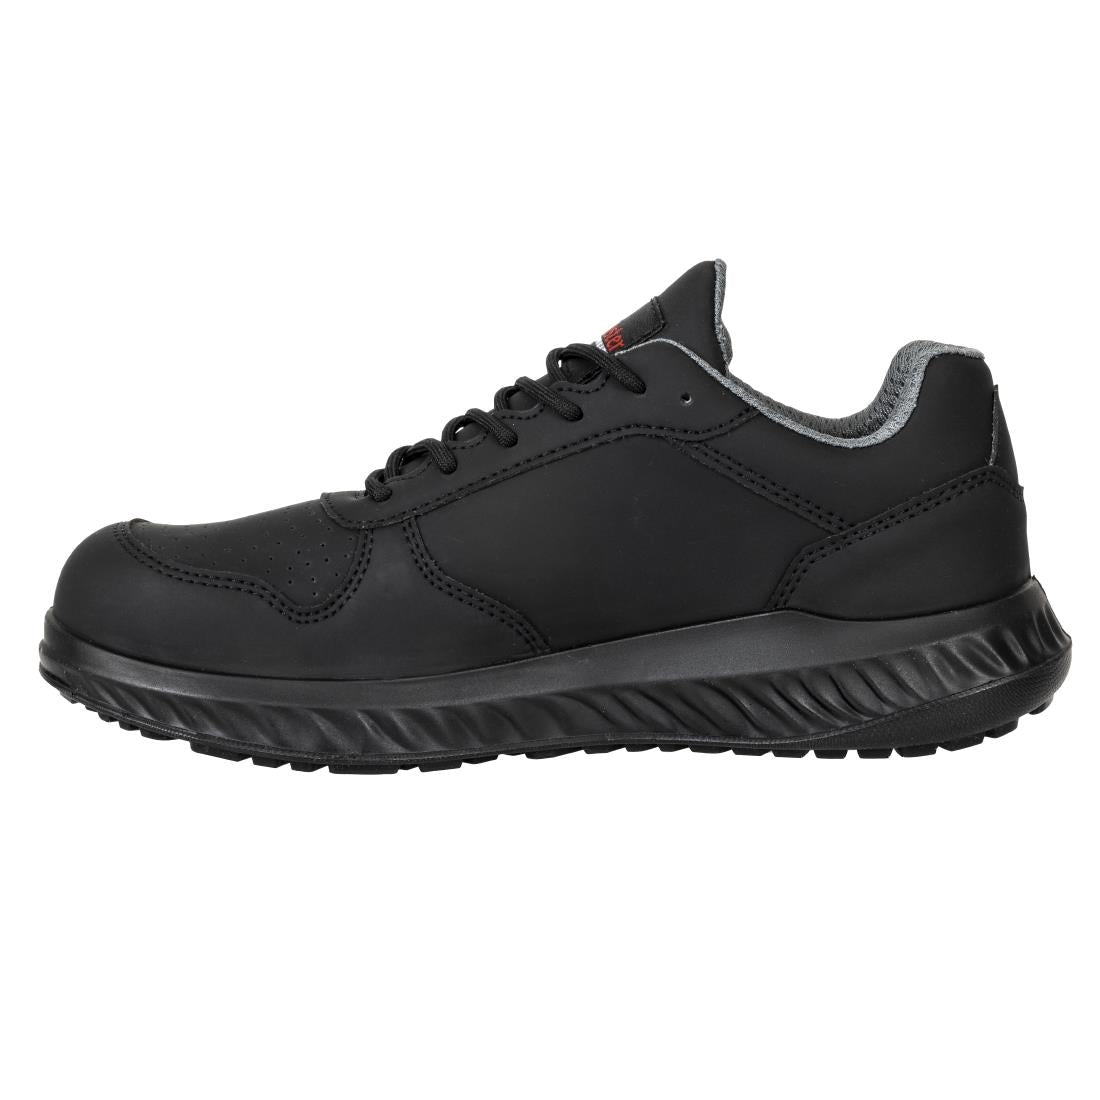 BA063-44 Slipbuster Recycled Microfibre Trainers Matte Black 44 JD Catering Equipment Solutions Ltd